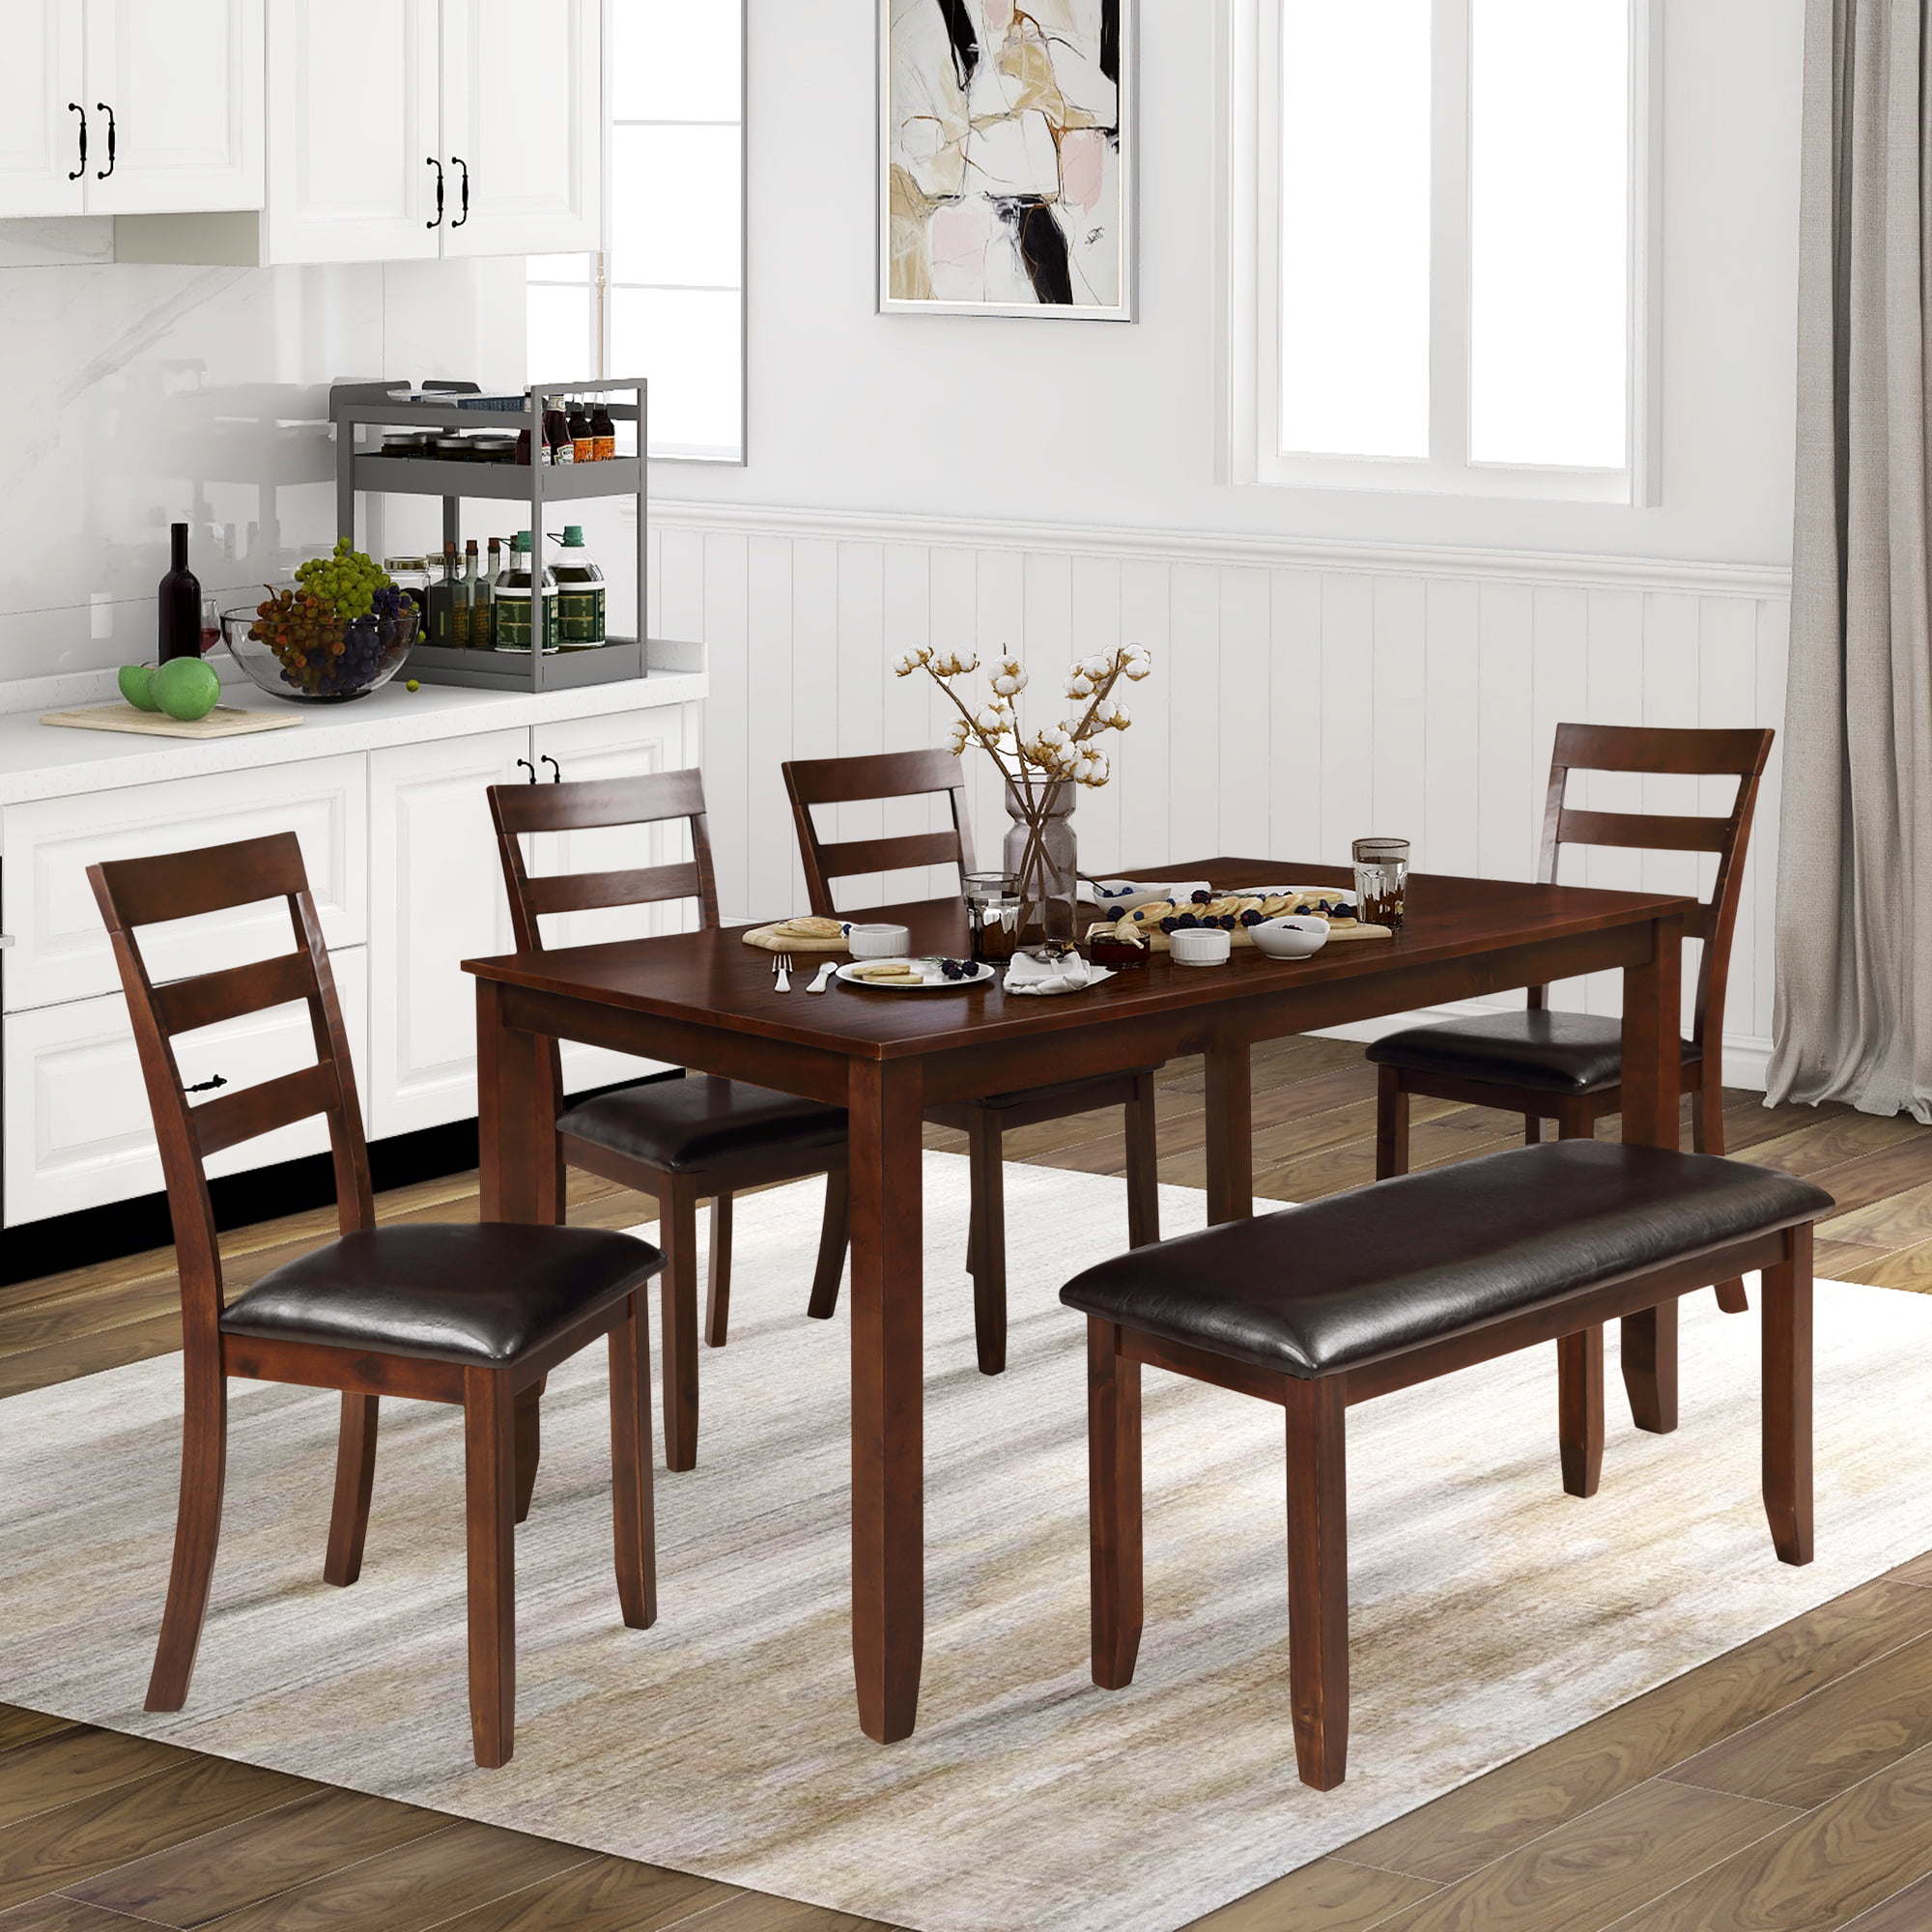 Gharpbik Breakfast Table Home Kitchen Dinning Room Set Tables and Chairs Wood One Table and Two Chairs